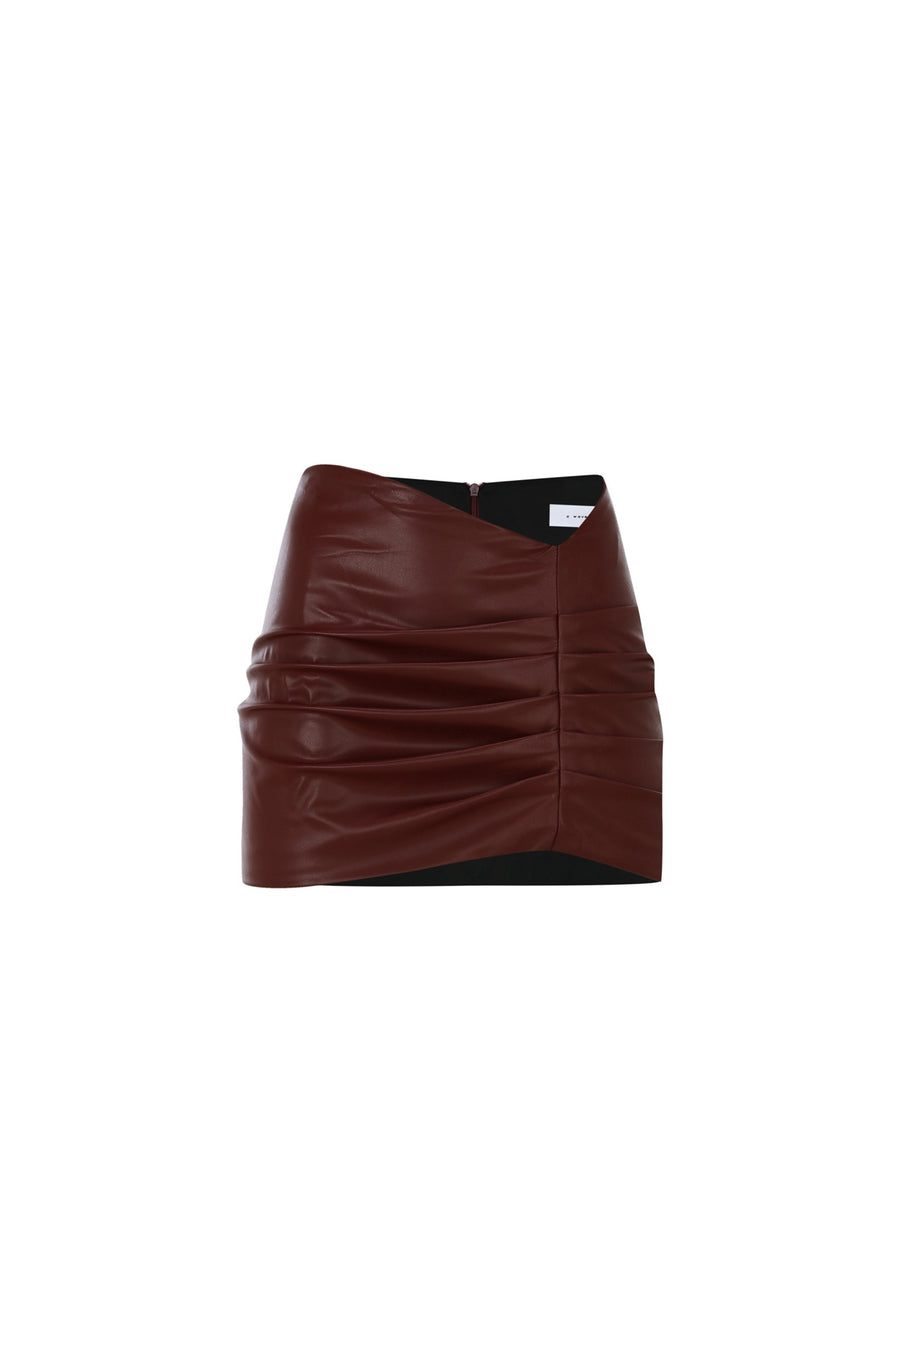 The Orfeo burgundy leather suit